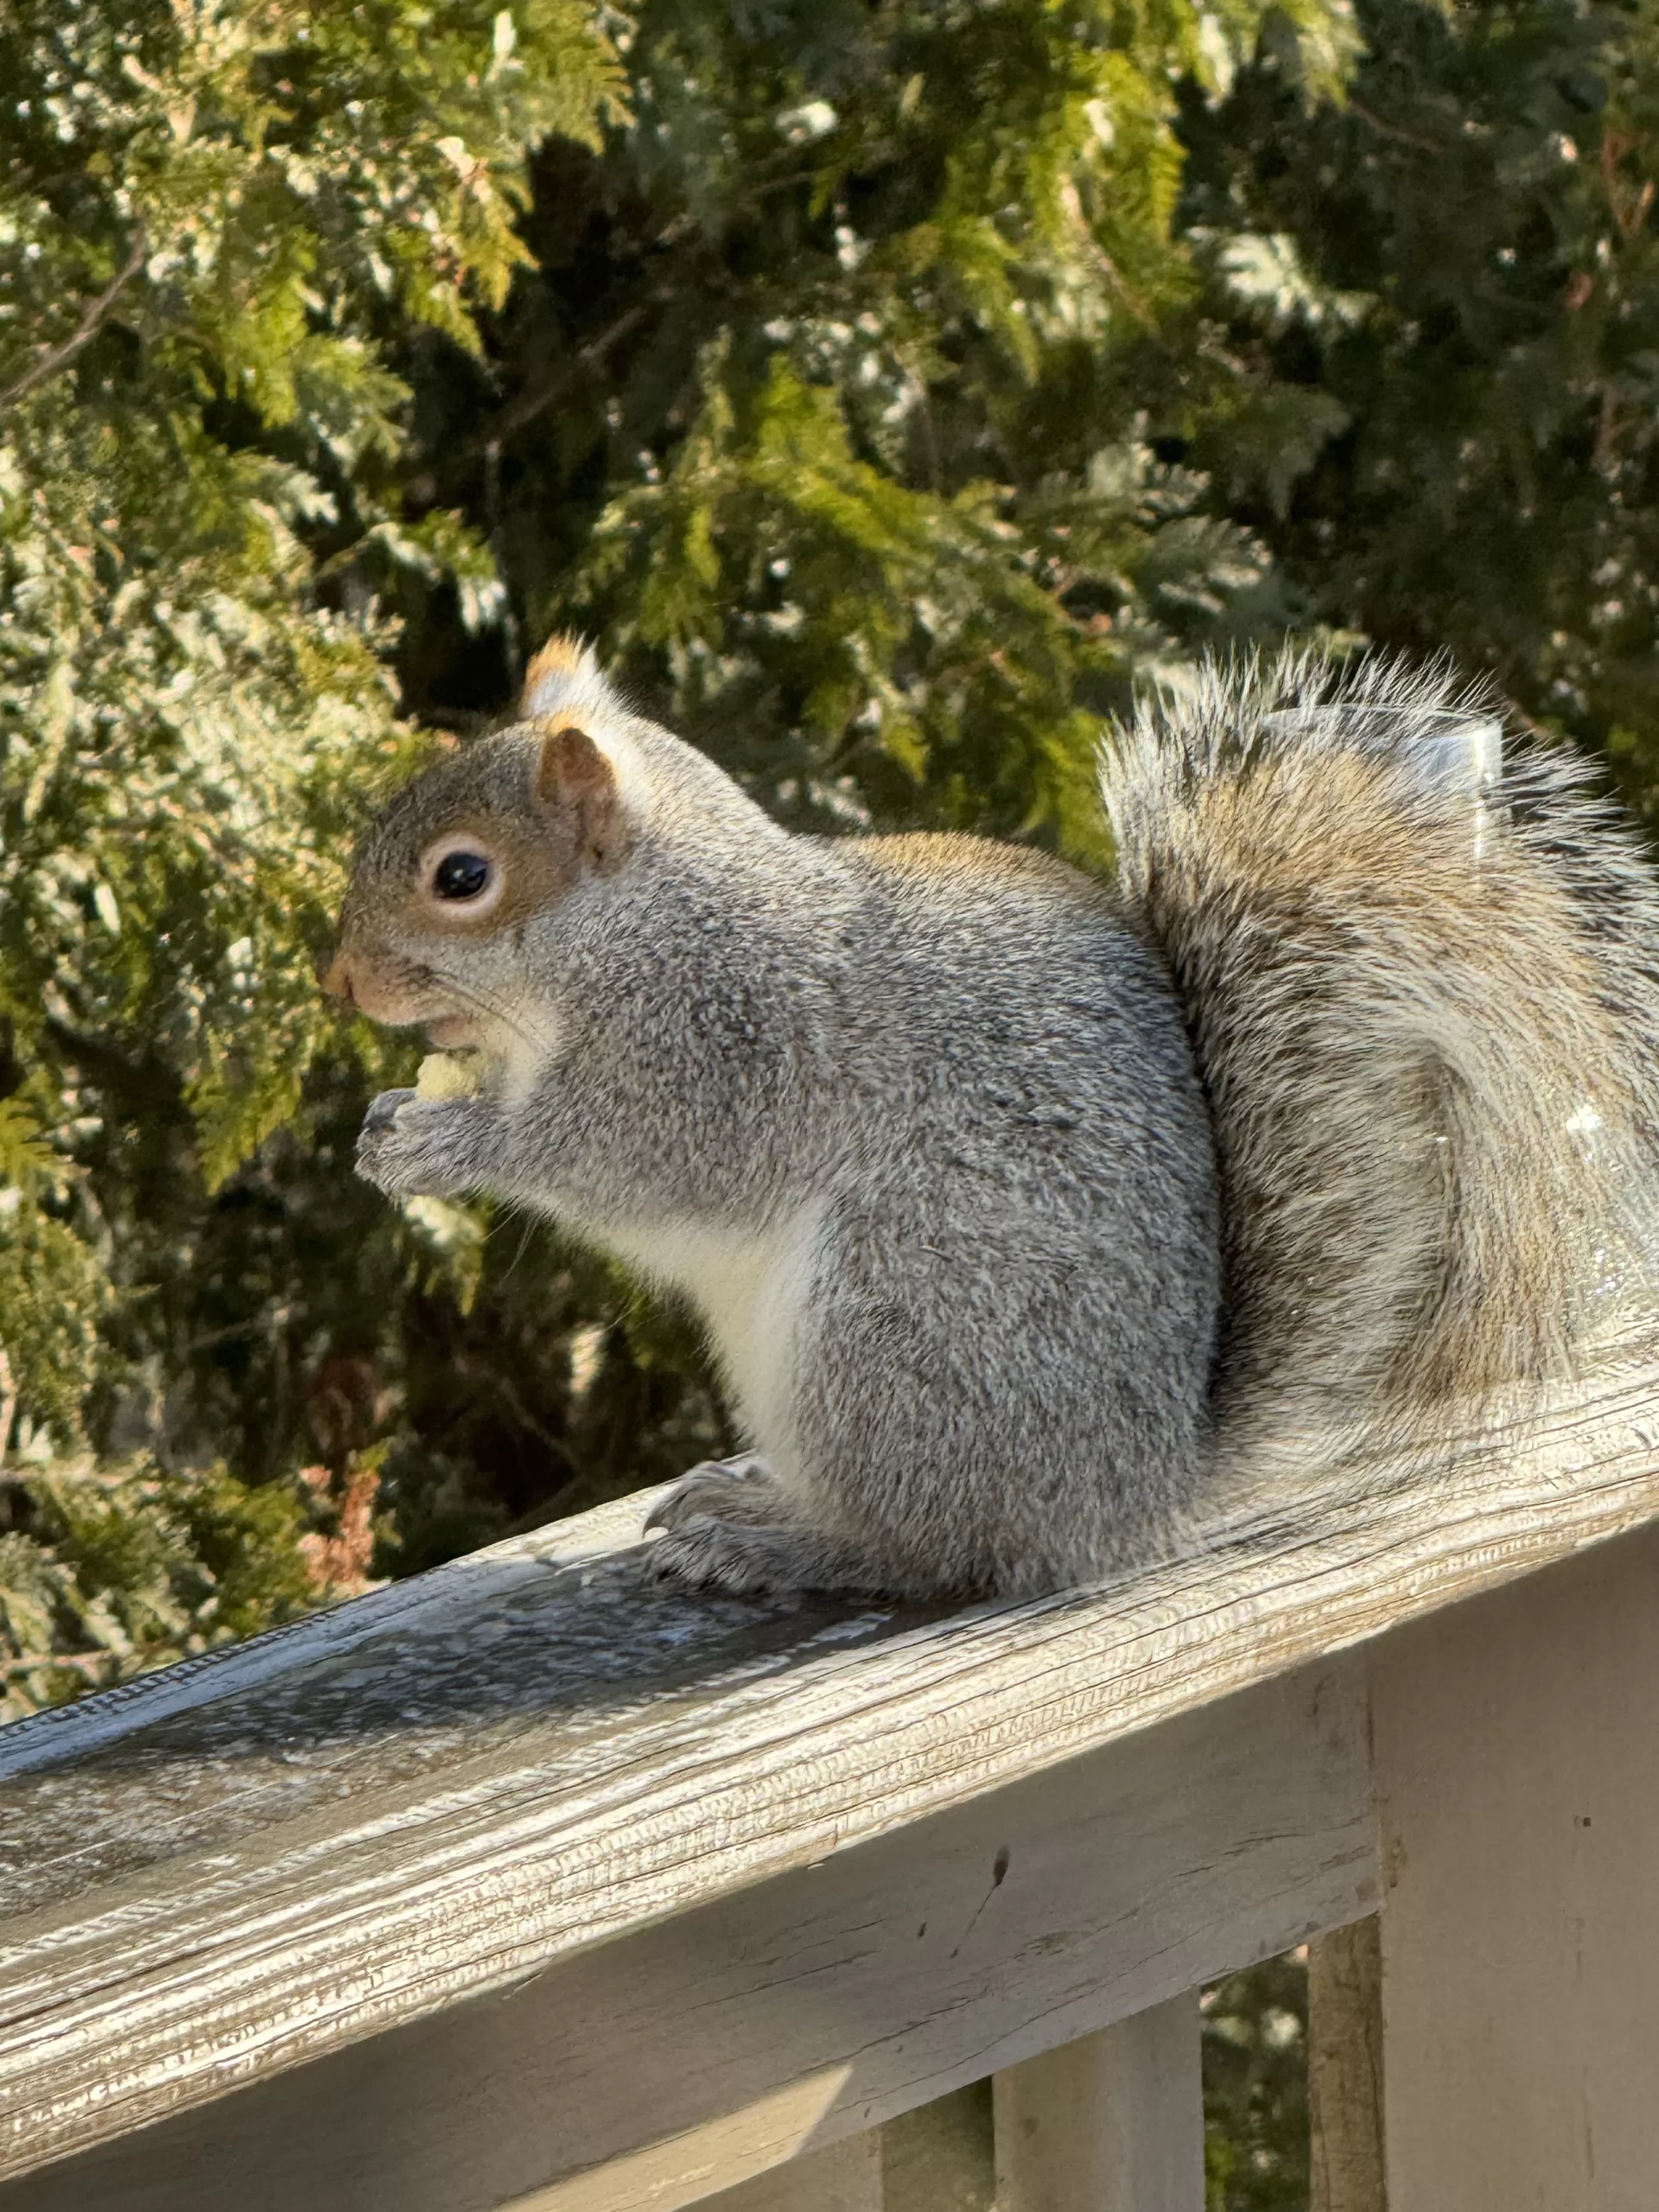 A grey squirrel eating on the wooden railing of a deck.